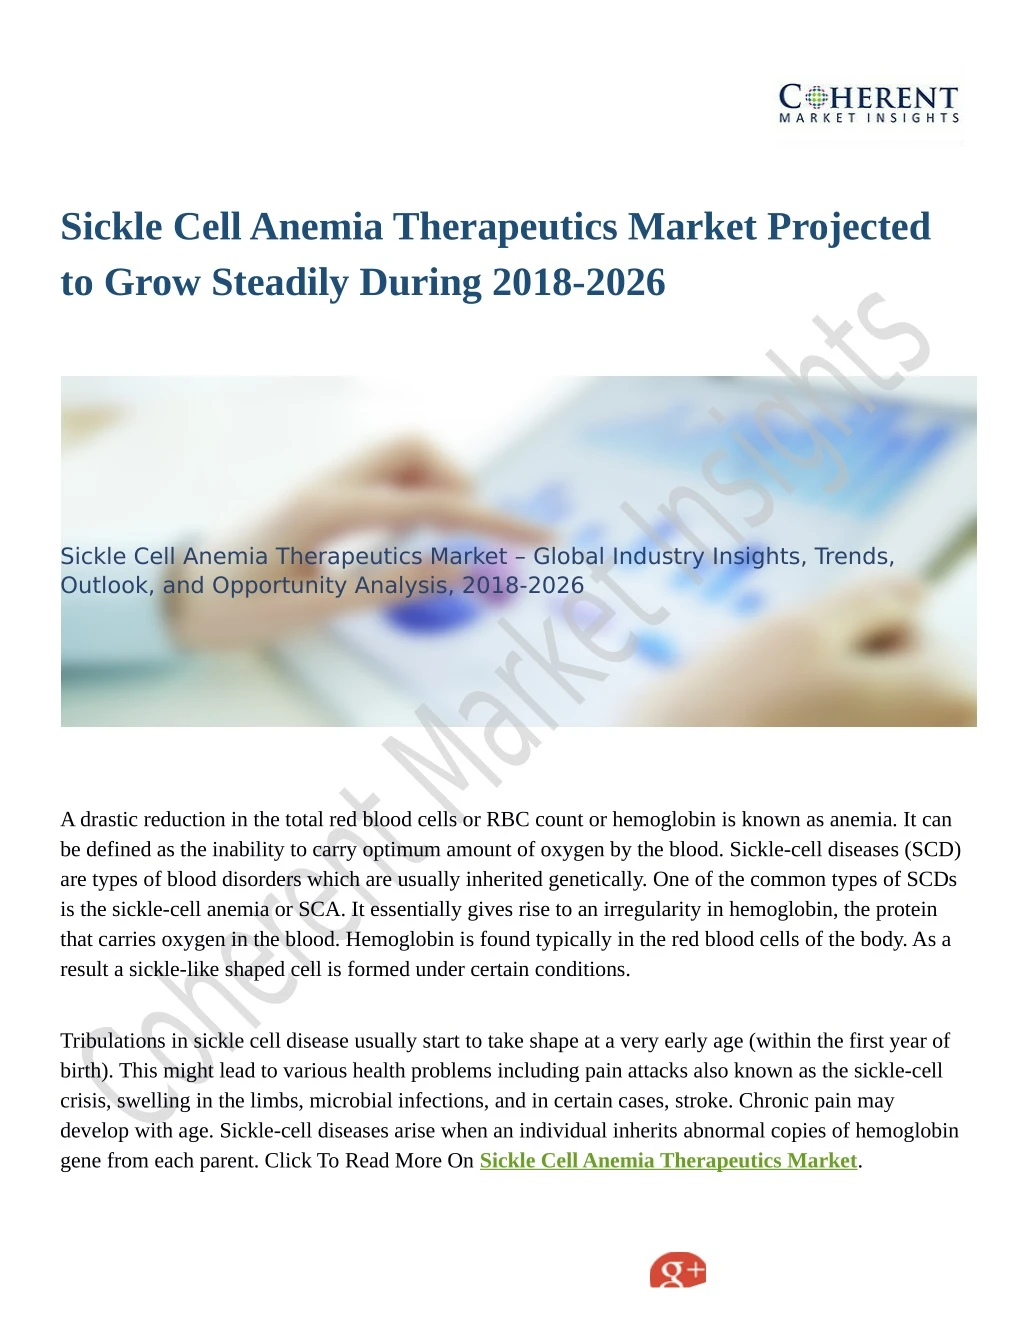 sickle cell anemia therapeutics market projected